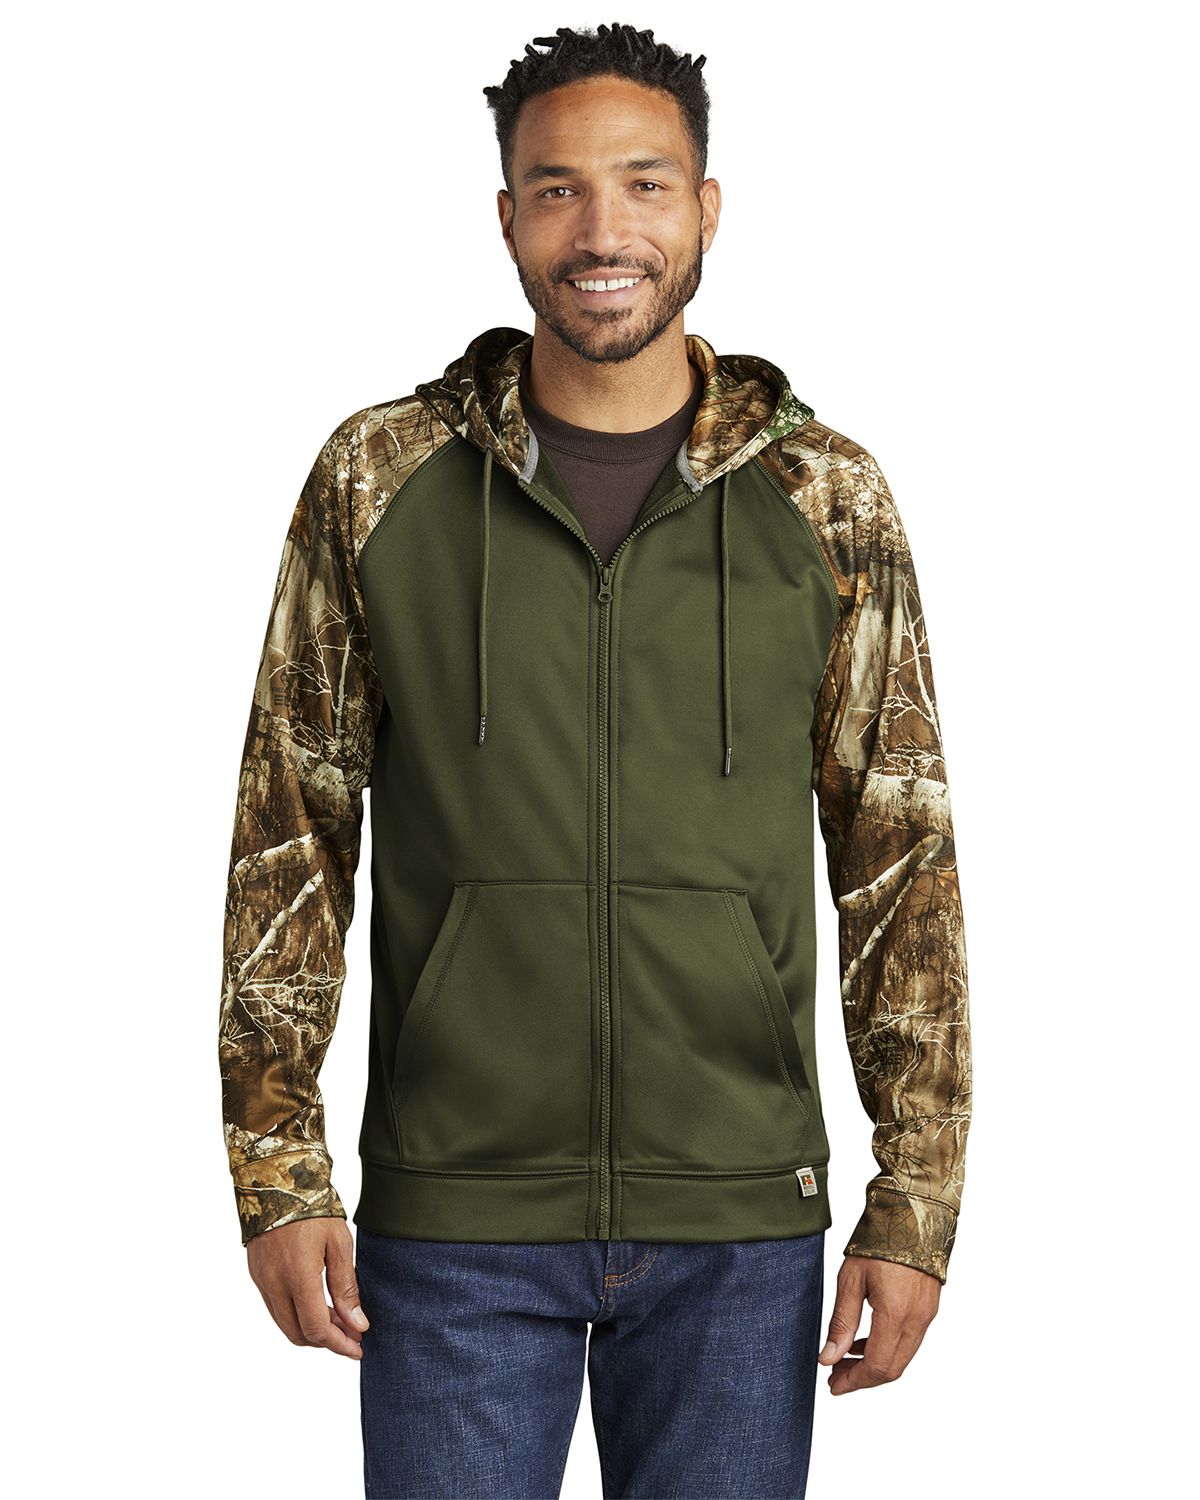 Selected Color is Olive Drab Green/ Realtree Edge